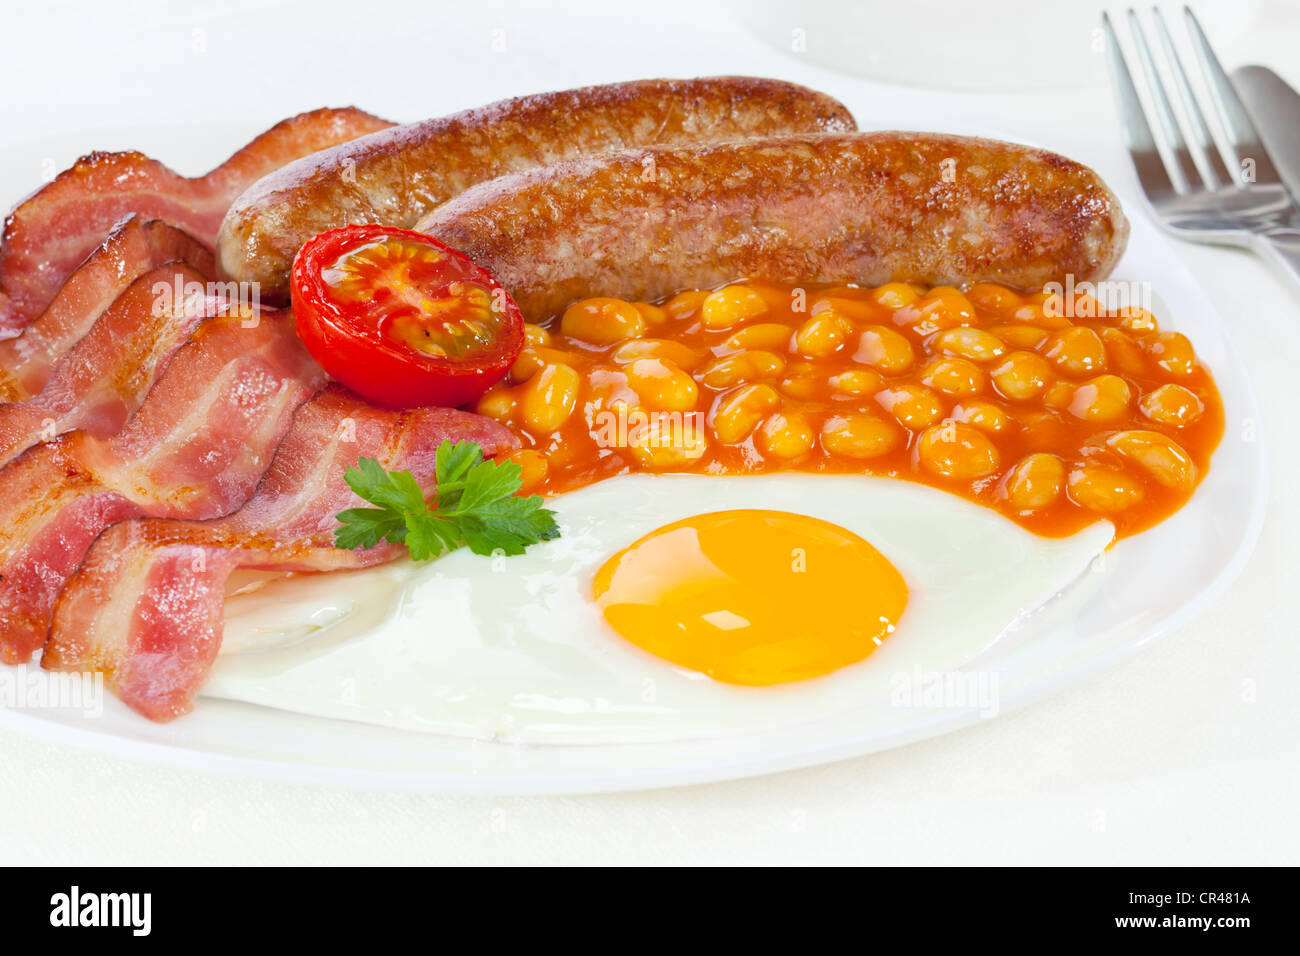 Full English Breakfast With Bacon Two Sausages A Fried Egg Baked Stock Photo Alamy